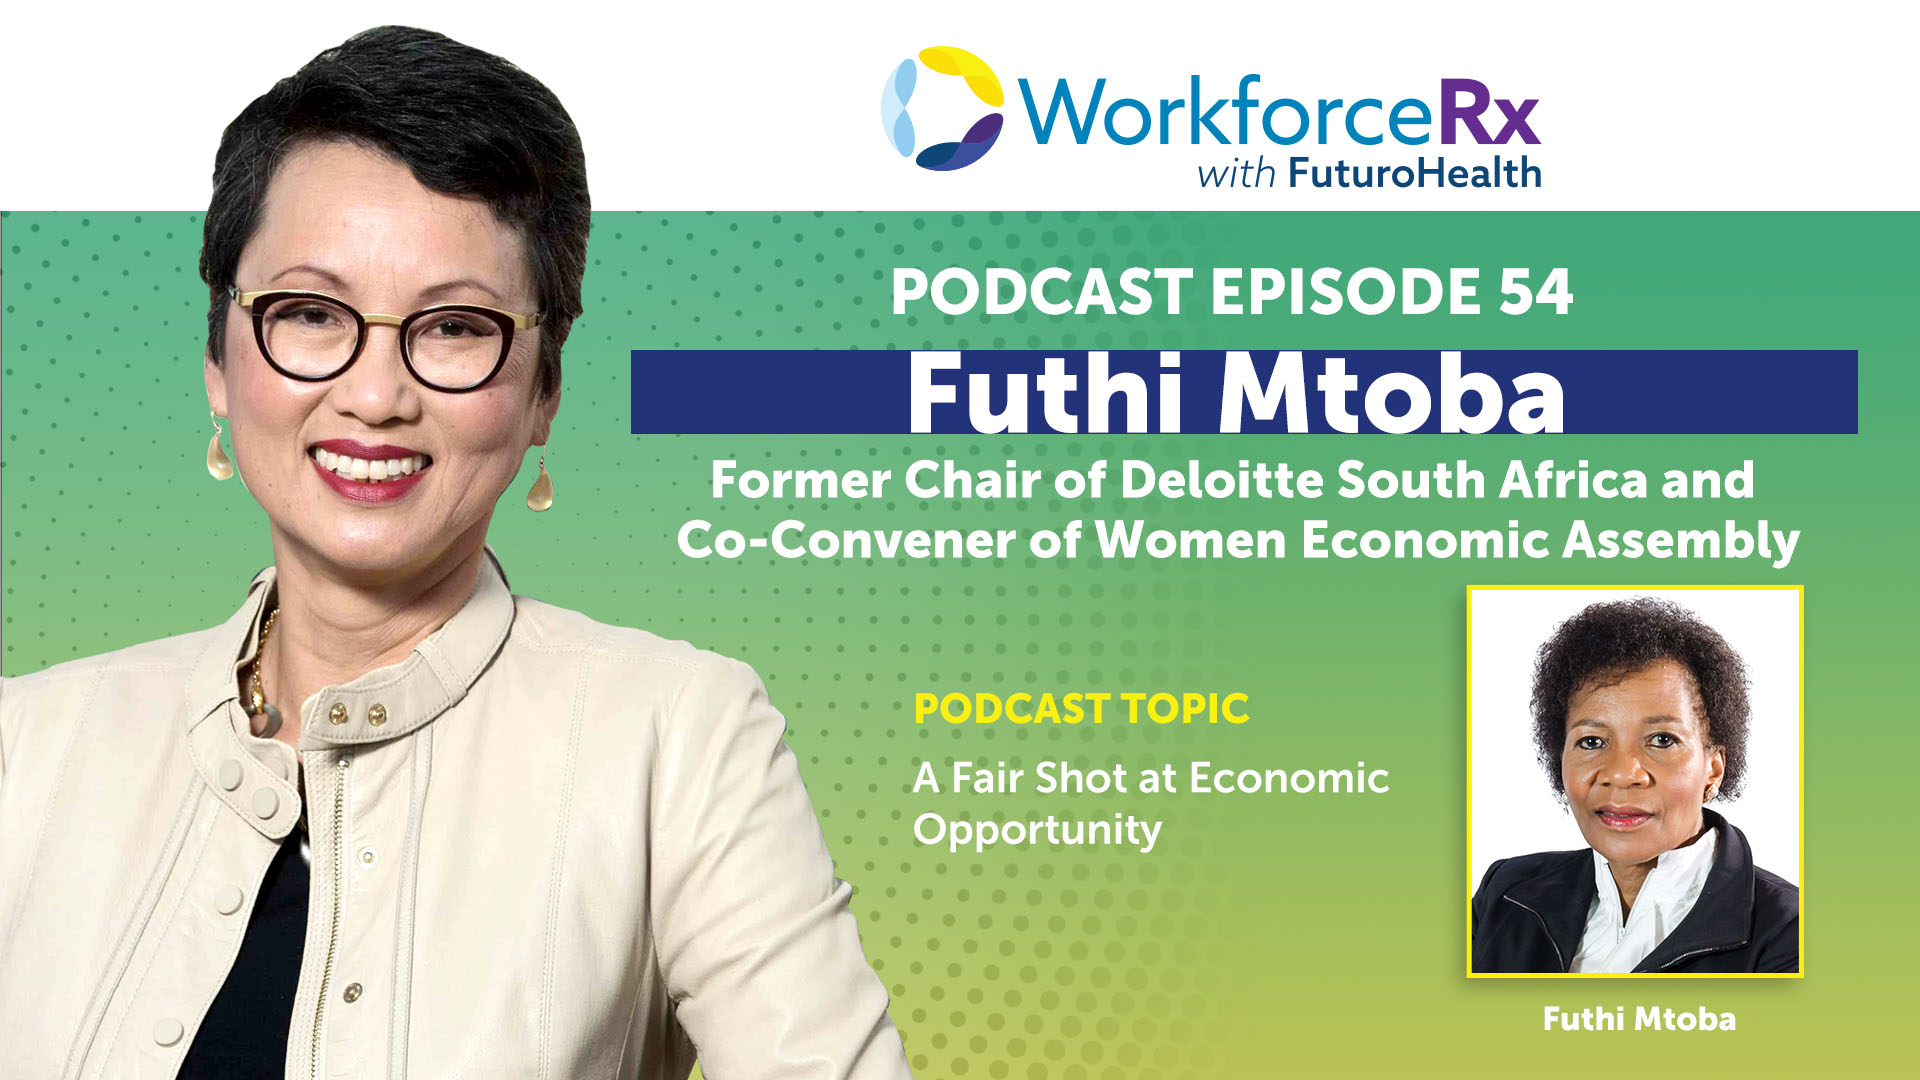 Futhi Mtoba, Former Chair of Deloitte South Africa and Co-Convener of Women Economic Assembly: A Fair Shot at Economic Opportunity